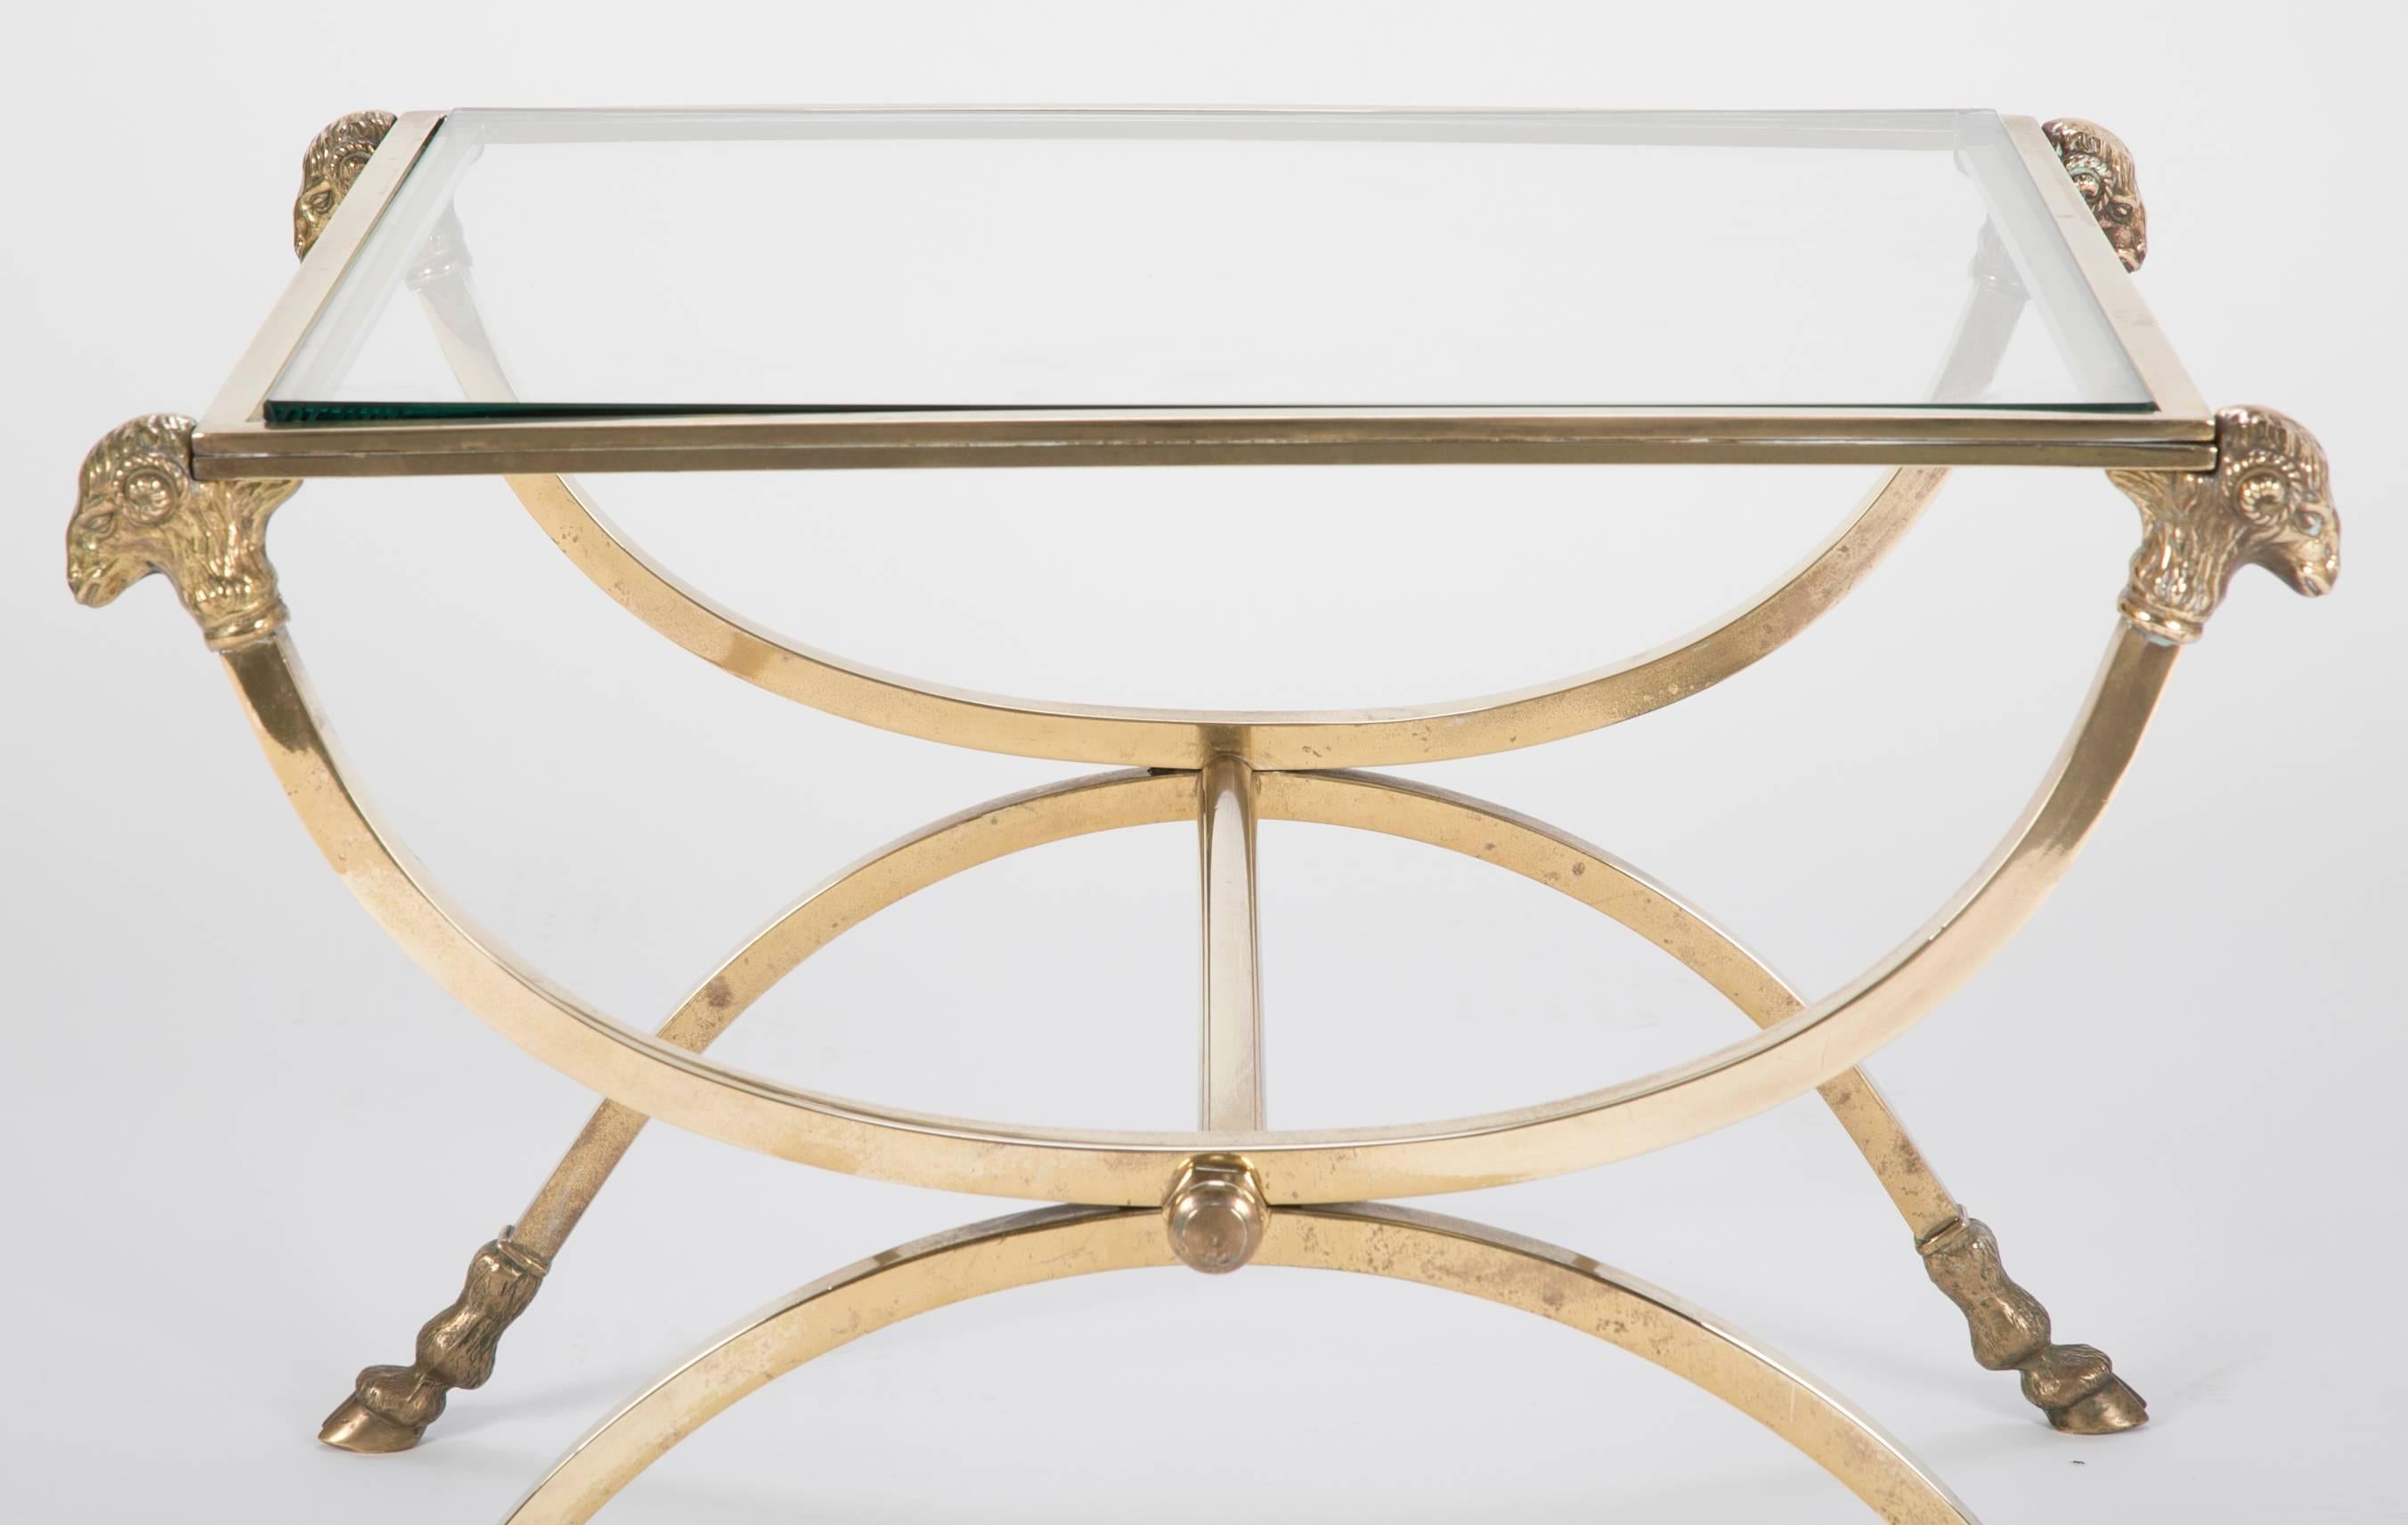 20th Century Italian Mid-Century Glass Topped Bronze Side Table with Rams Heads and Hoof Feet For Sale